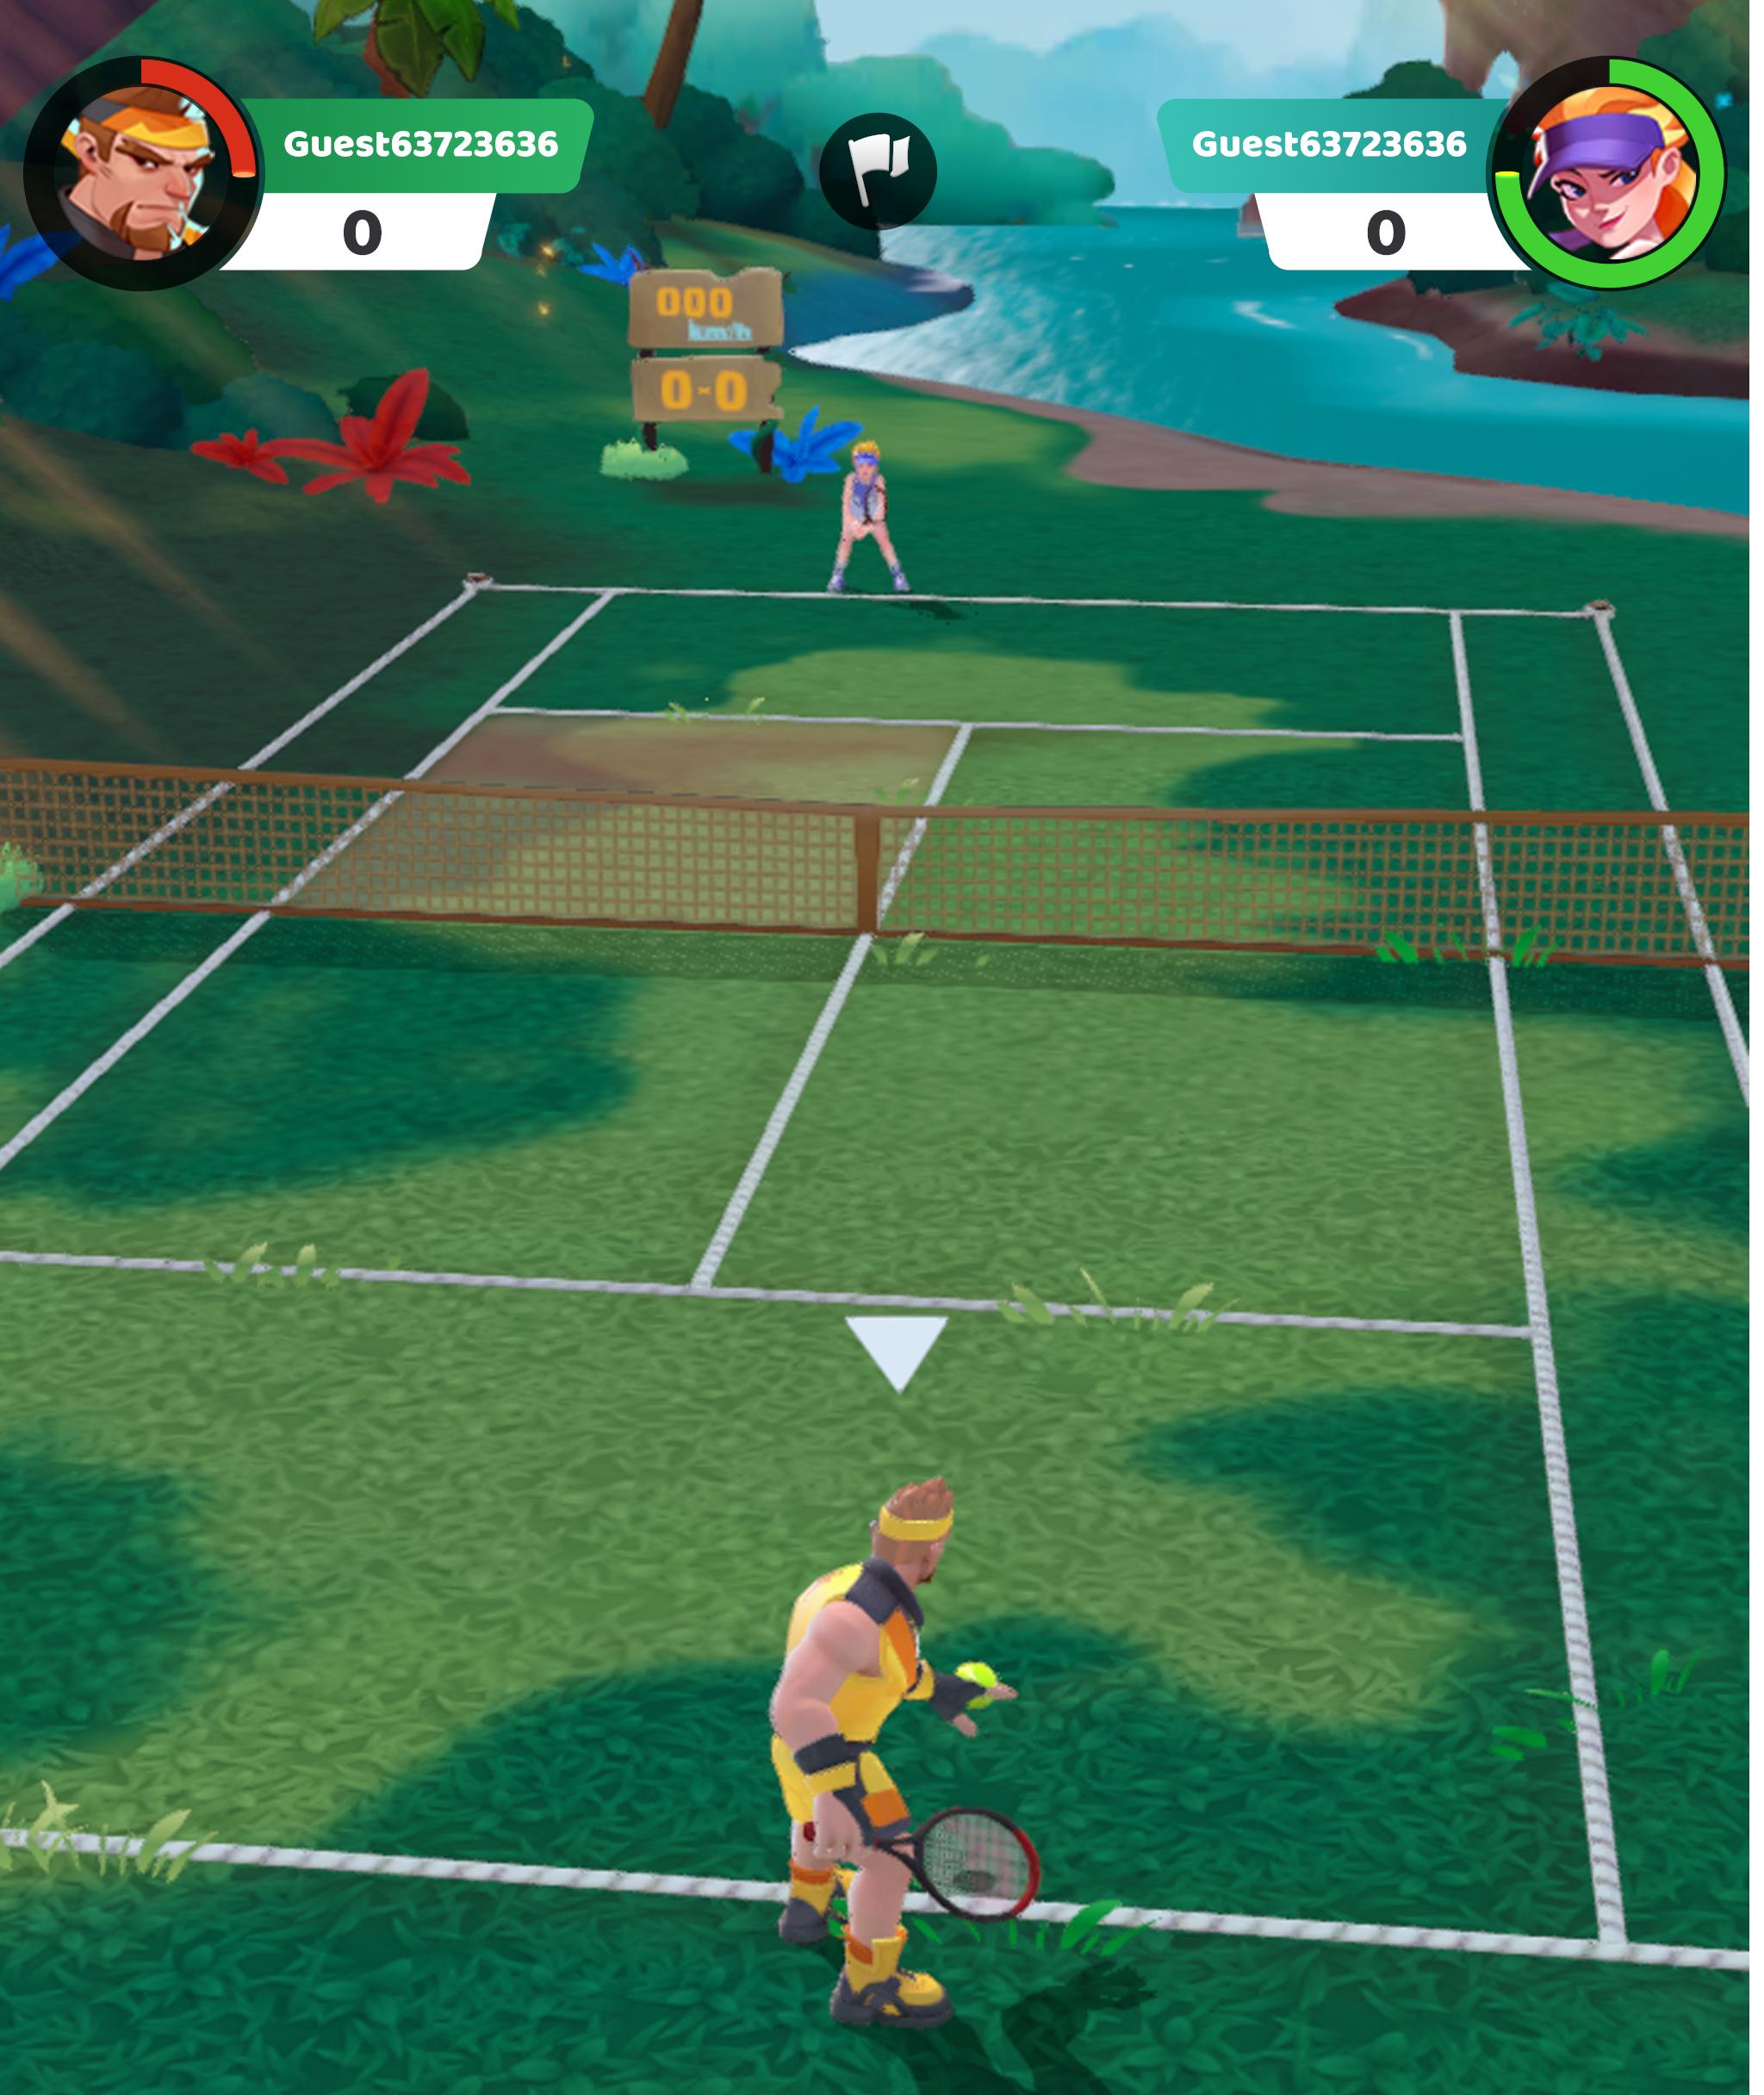 Extreme Tennis for Android - APK Download